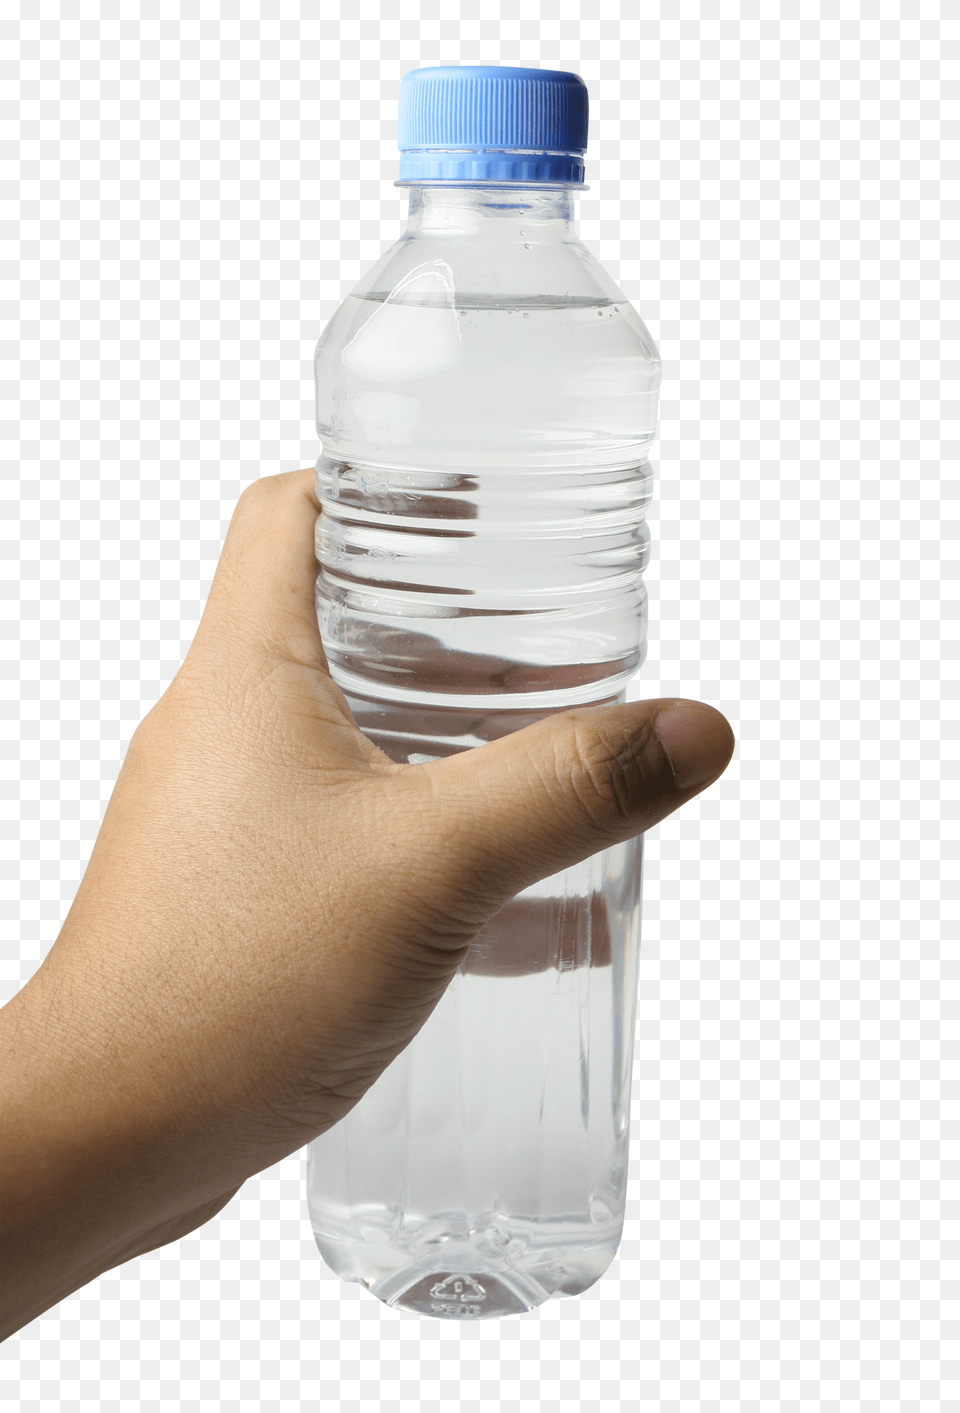 Pngpix Com Hand With Water Bottle Transparent Image, Water Bottle, Beverage, Mineral Water, Person Free Png Download